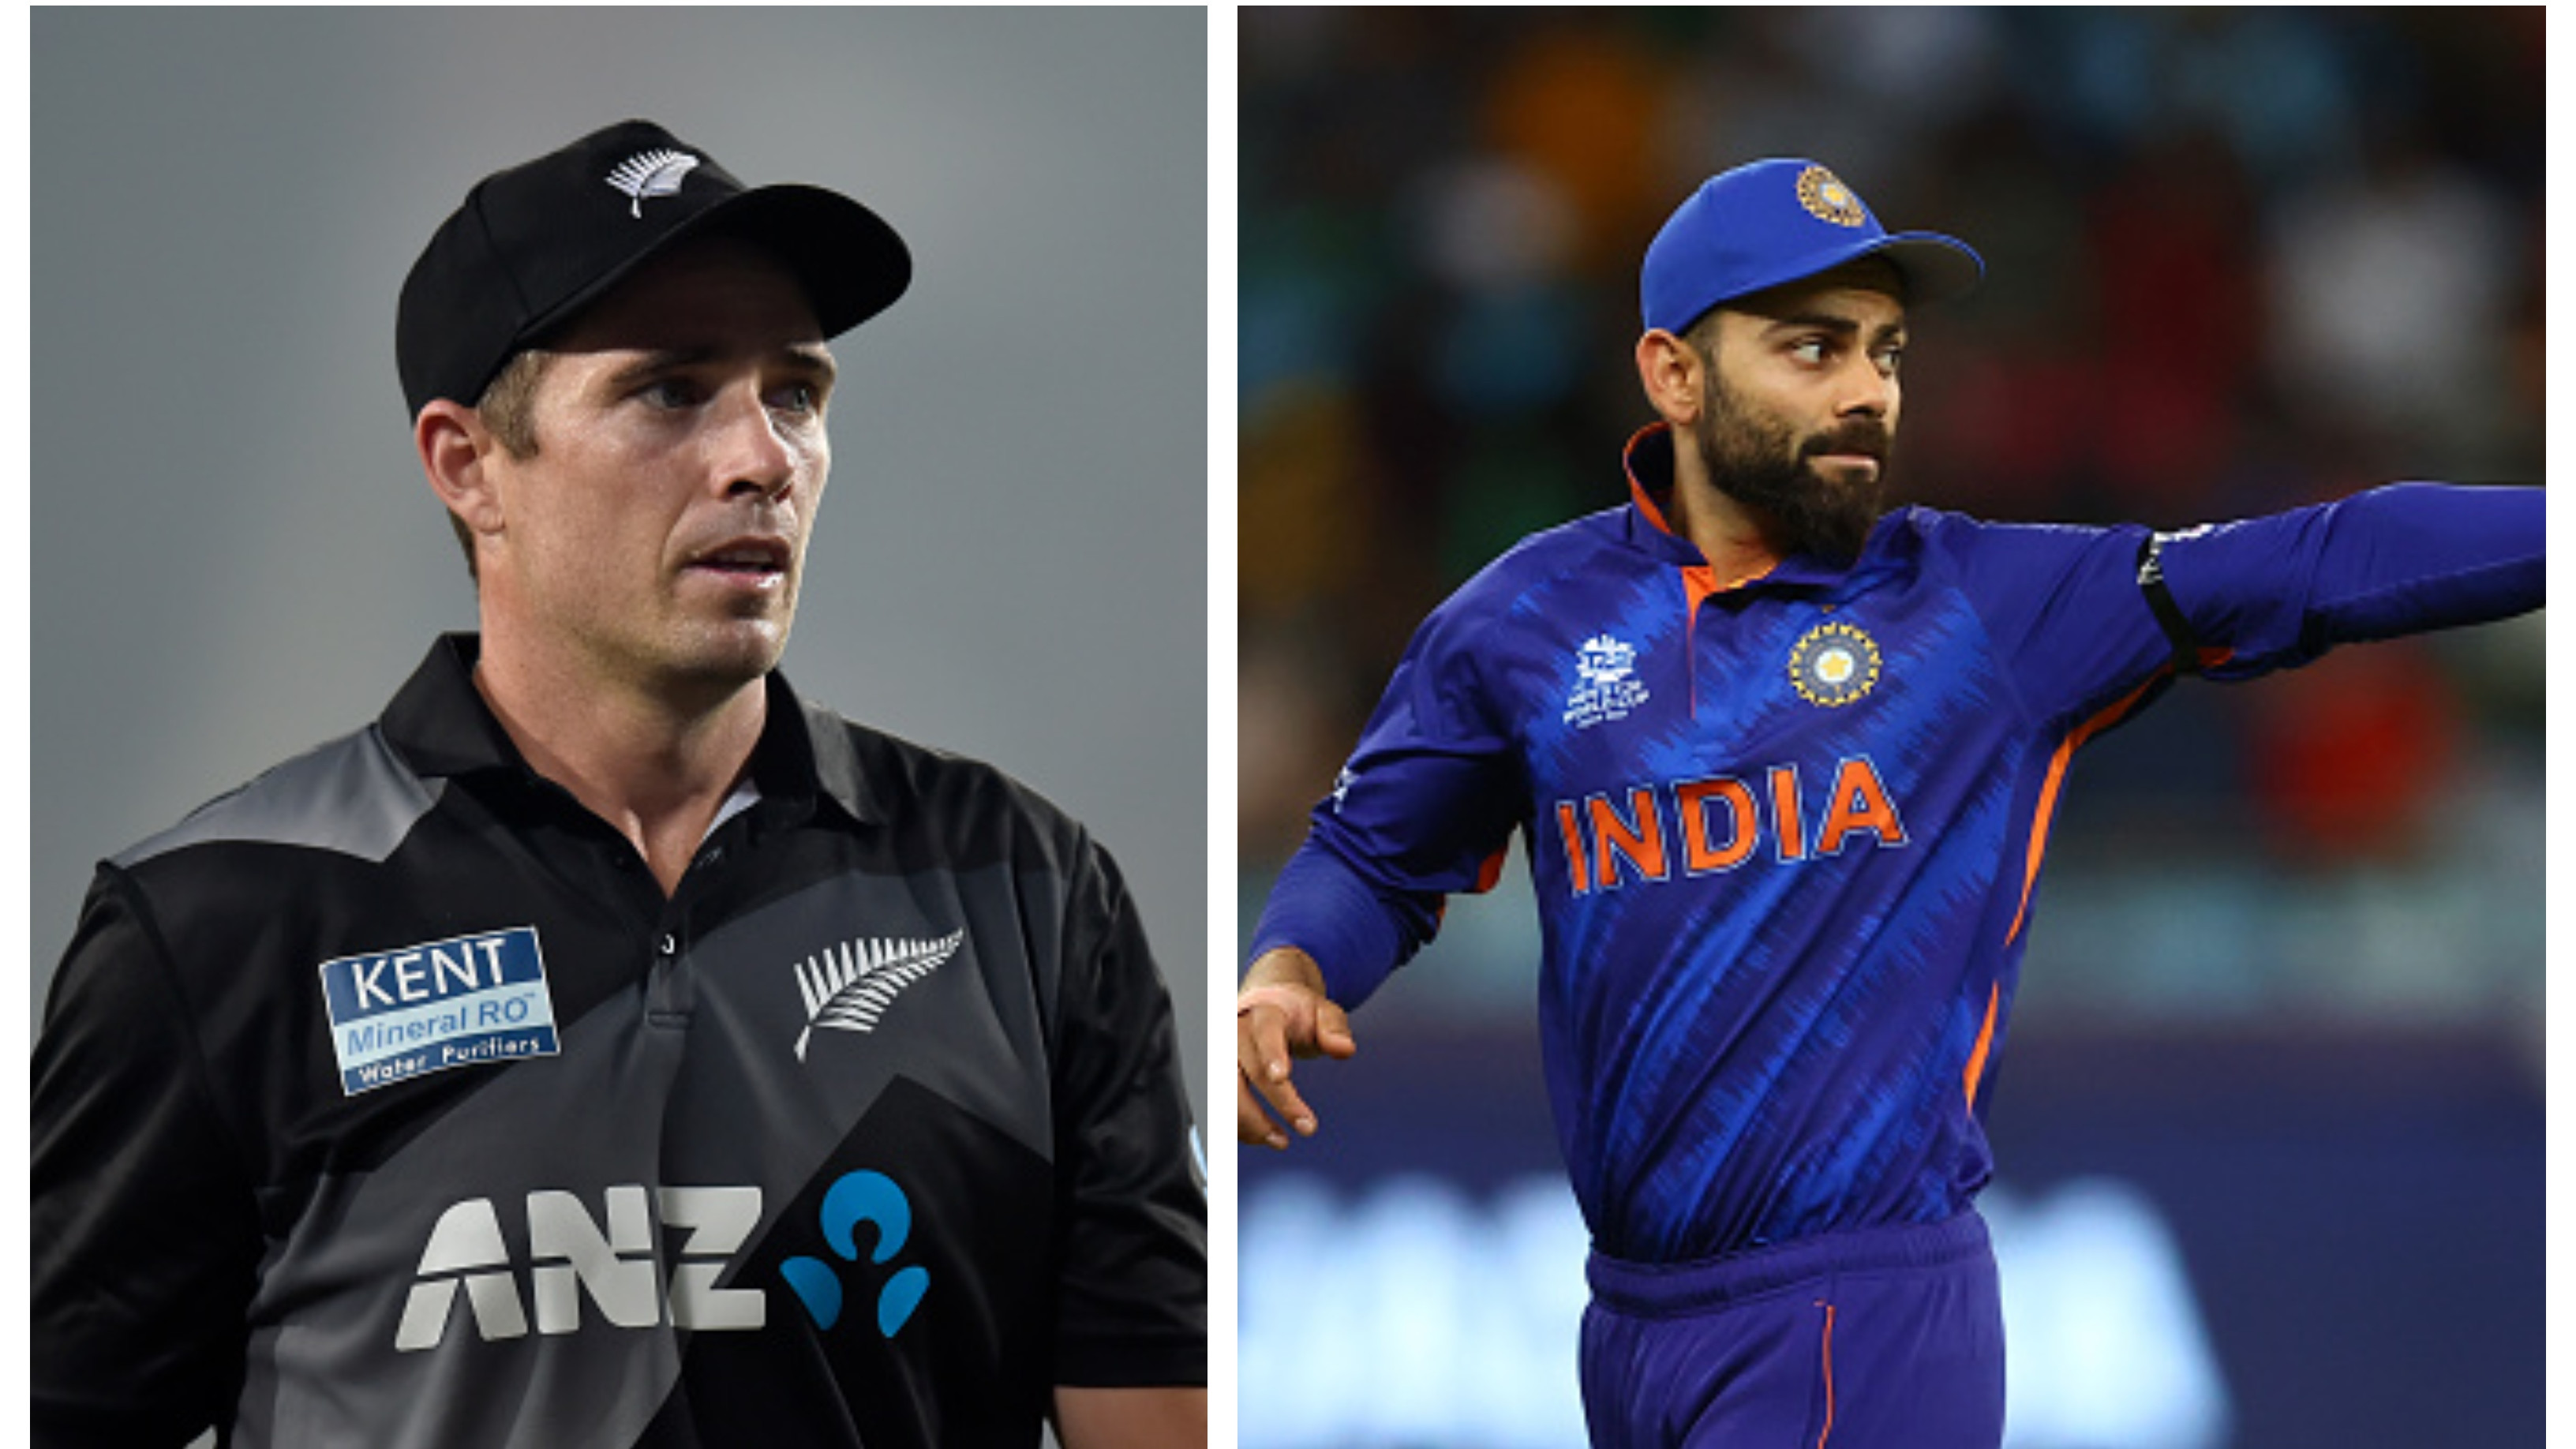 “It’s a weight off his shoulders”, Southee shares his two cents on Kohli’s white-ball captaincy exit